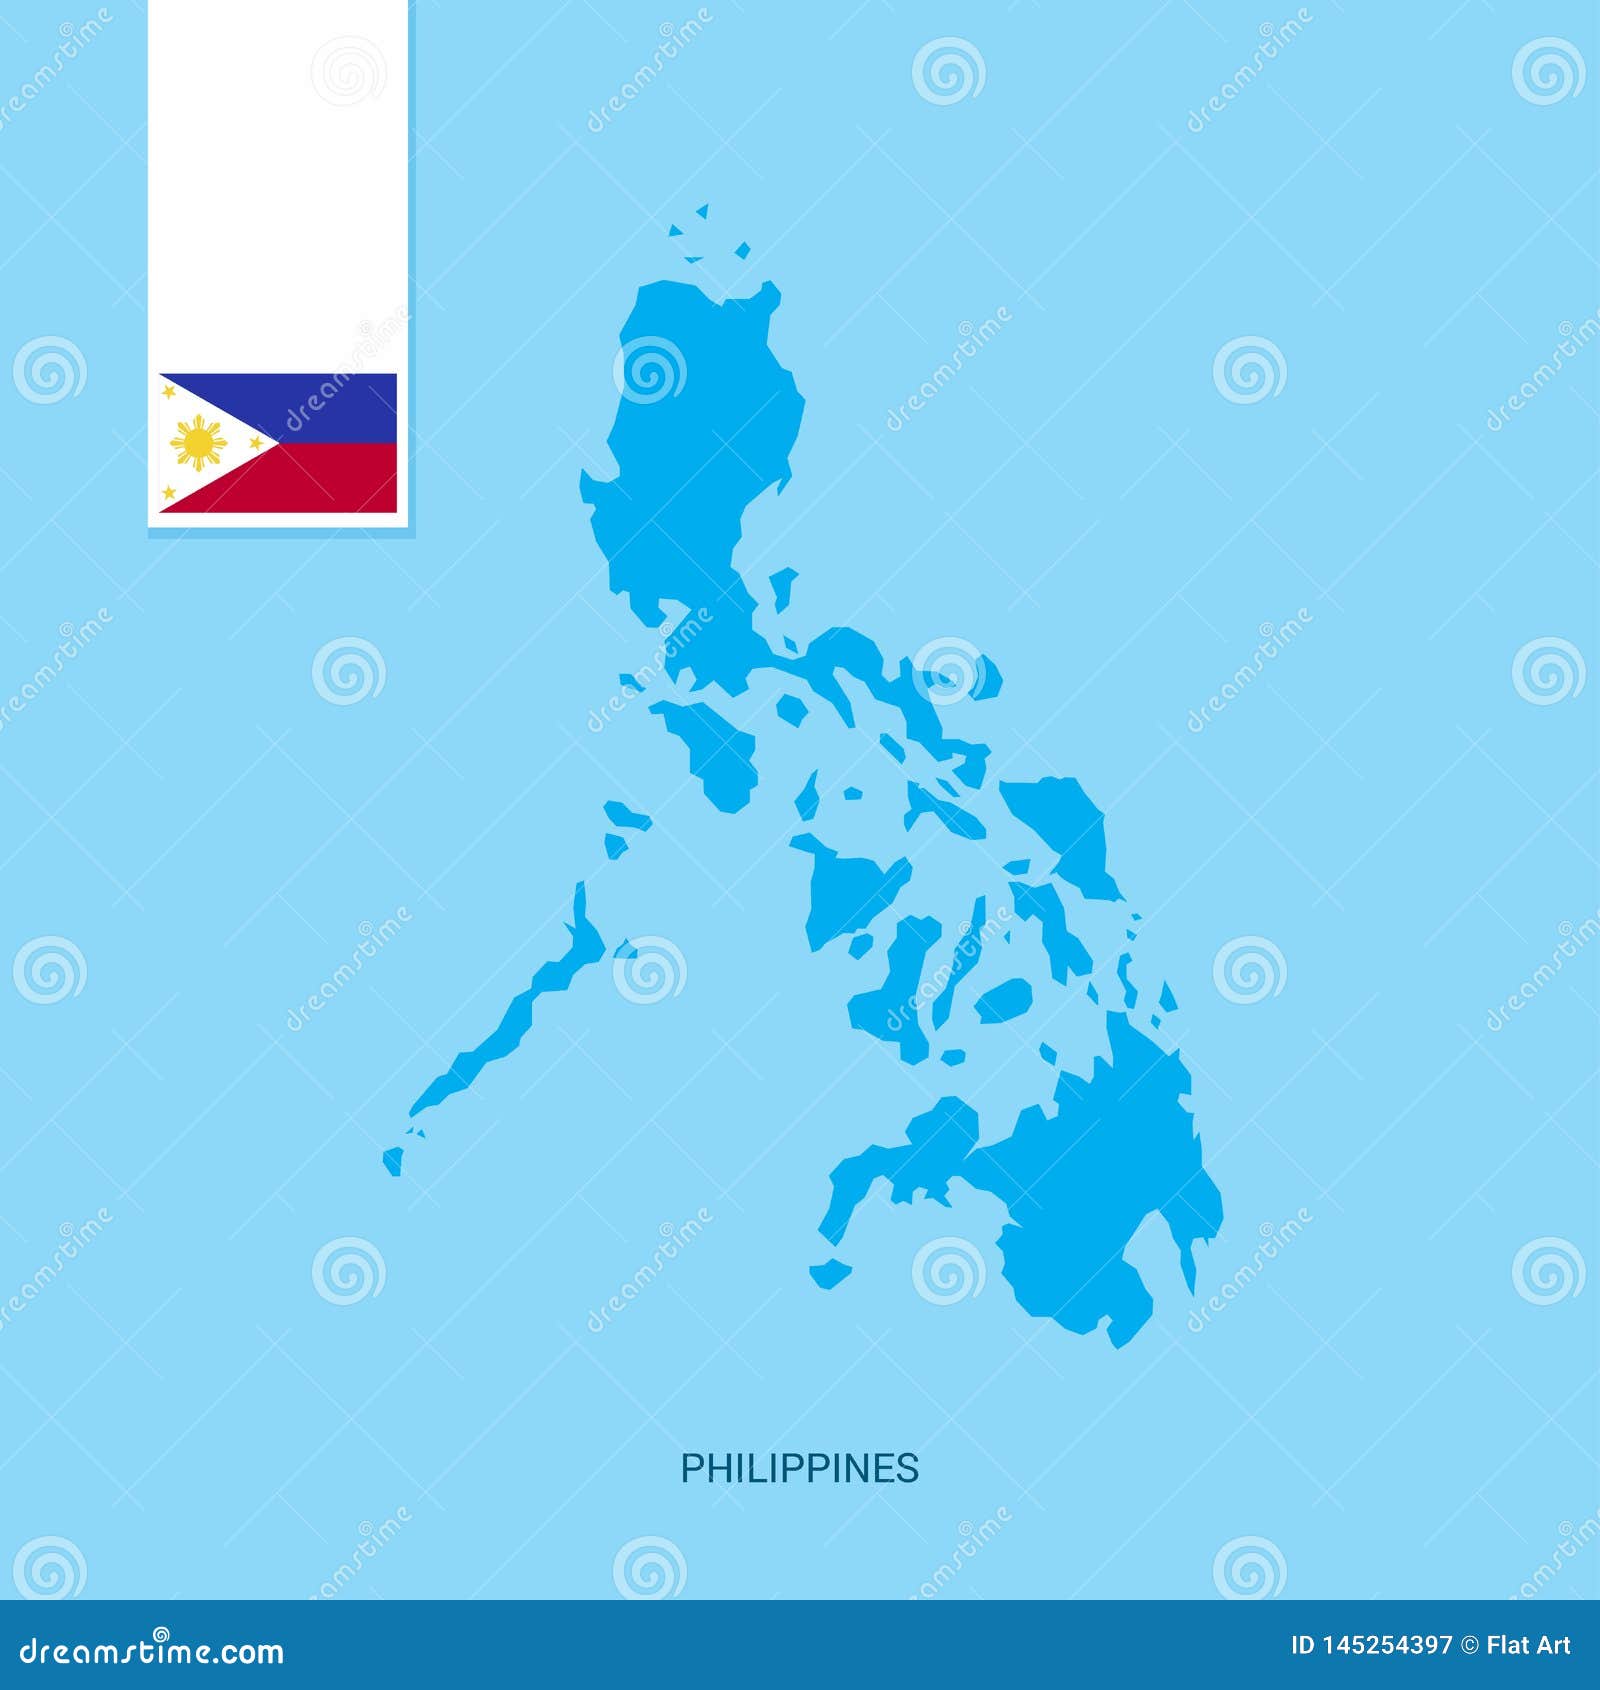 Phillipines Country Map with Flag Over Blue Background Stock Vector ...